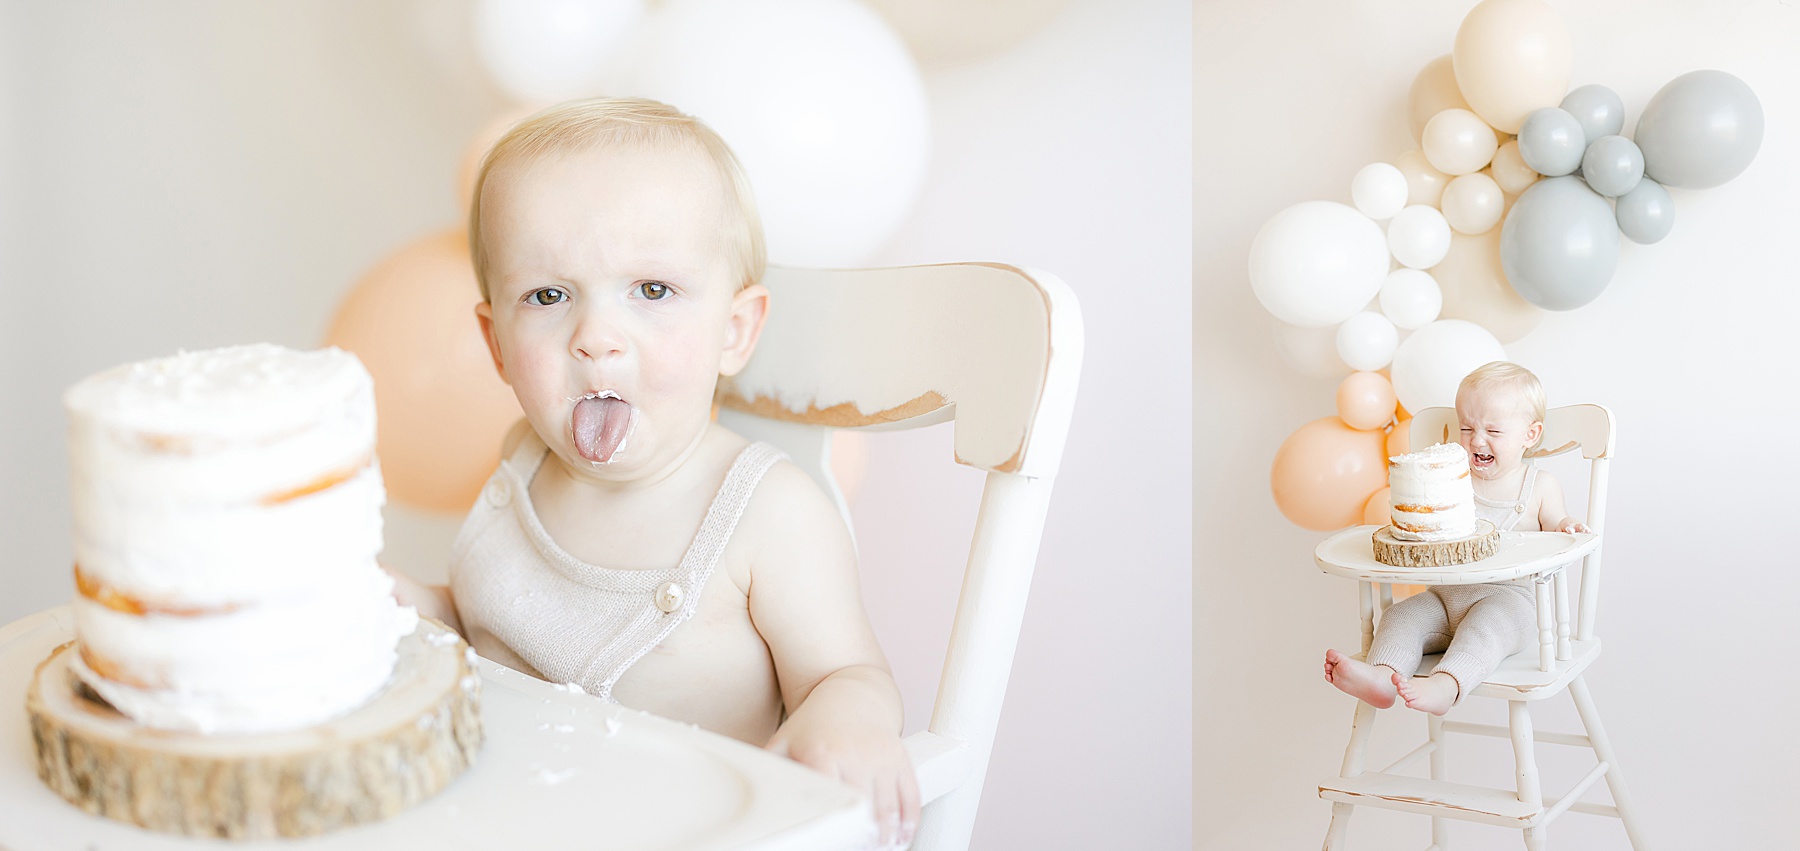 baby boy licking birthday cake and crying in white high chair